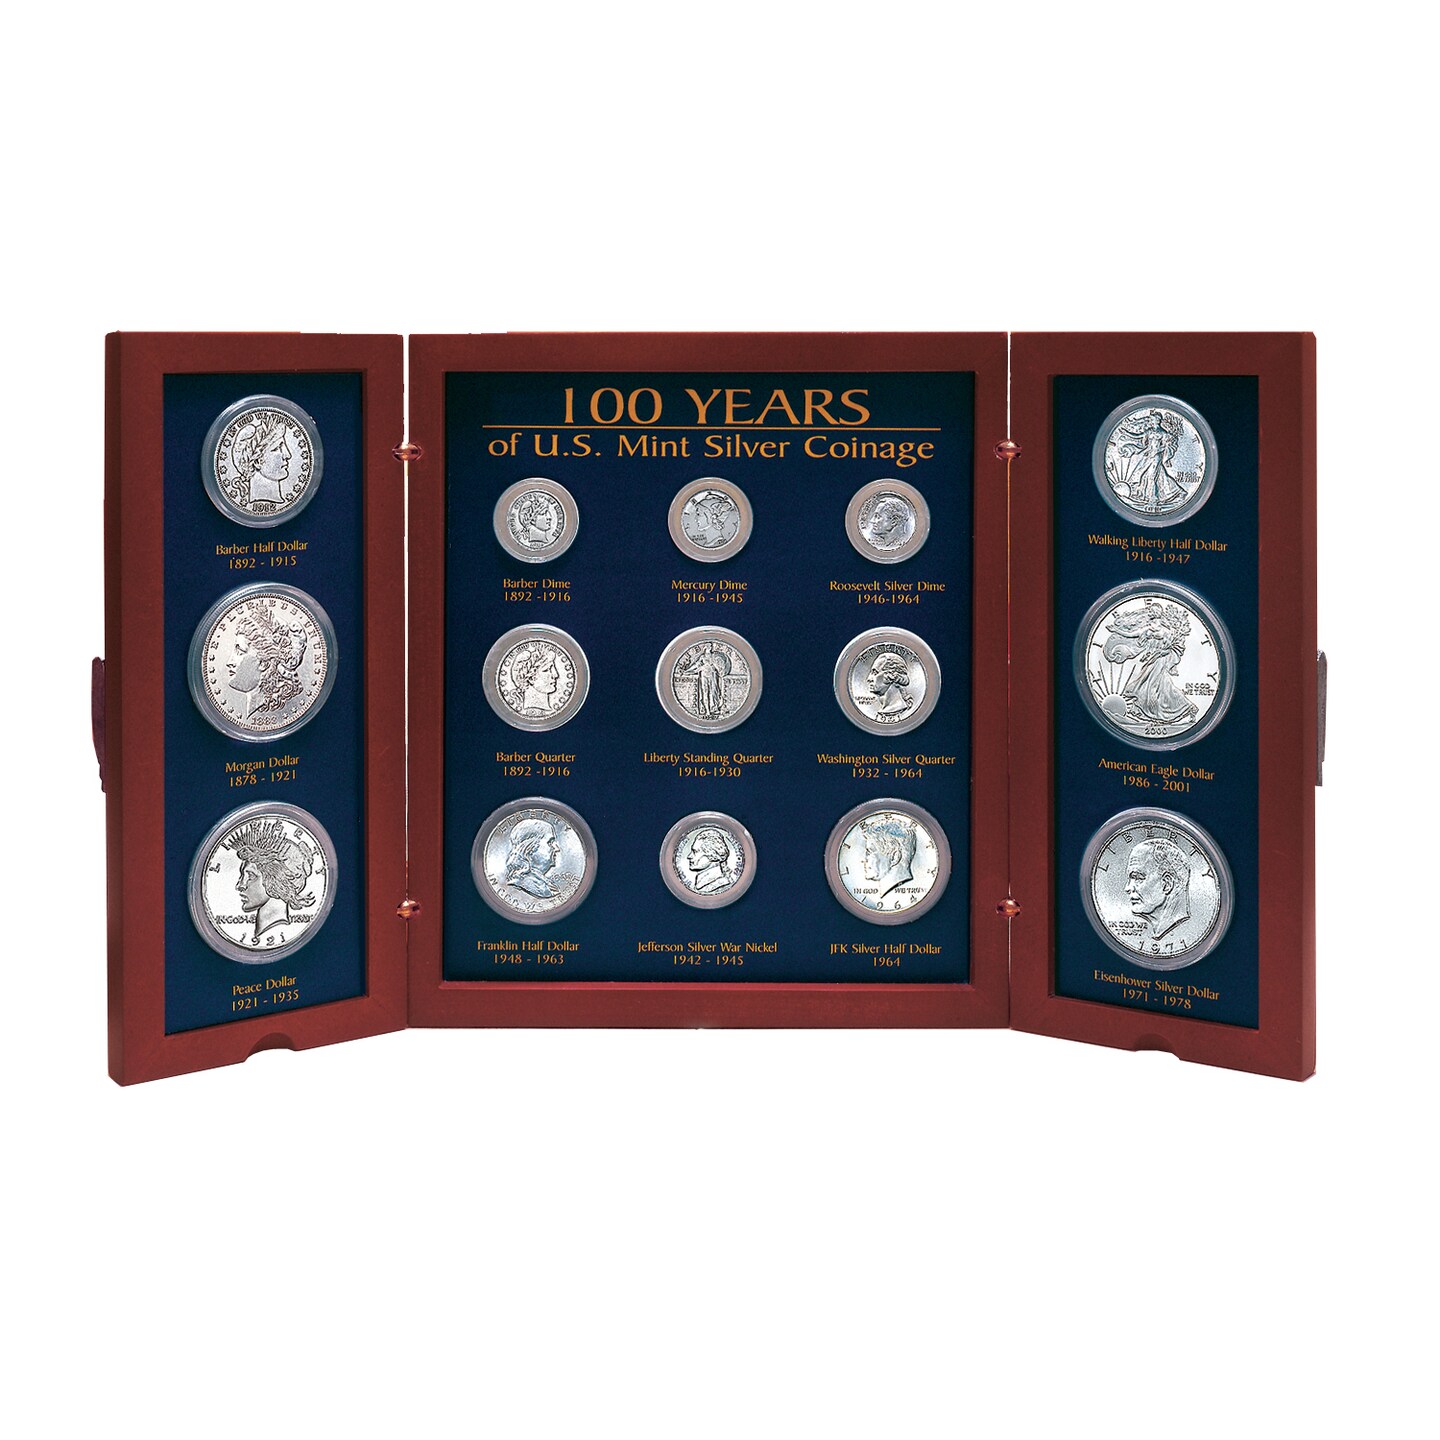 100-Years of U.S Mint Coin Designs